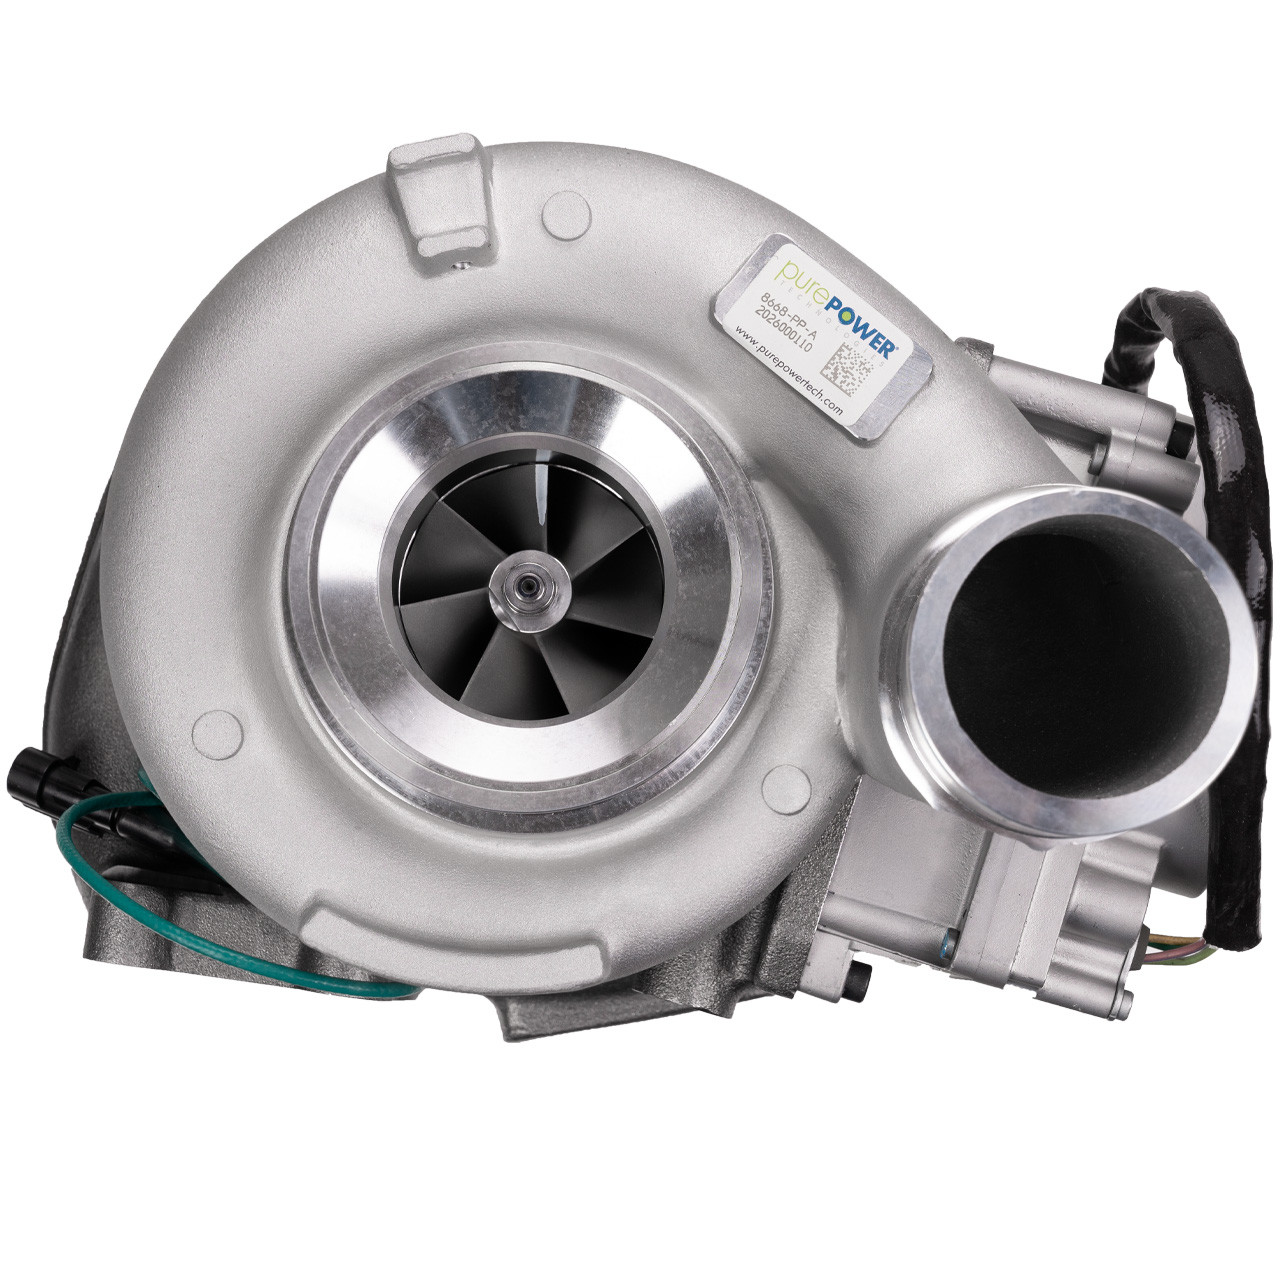 Turbo Actuator Replacement for 2007-2012 Dodge Ram 2500 3500 ISB 6.7 Diesel Cummins VGT Holset HE351VE Turbocharger Electronic Actuator Flynsu 